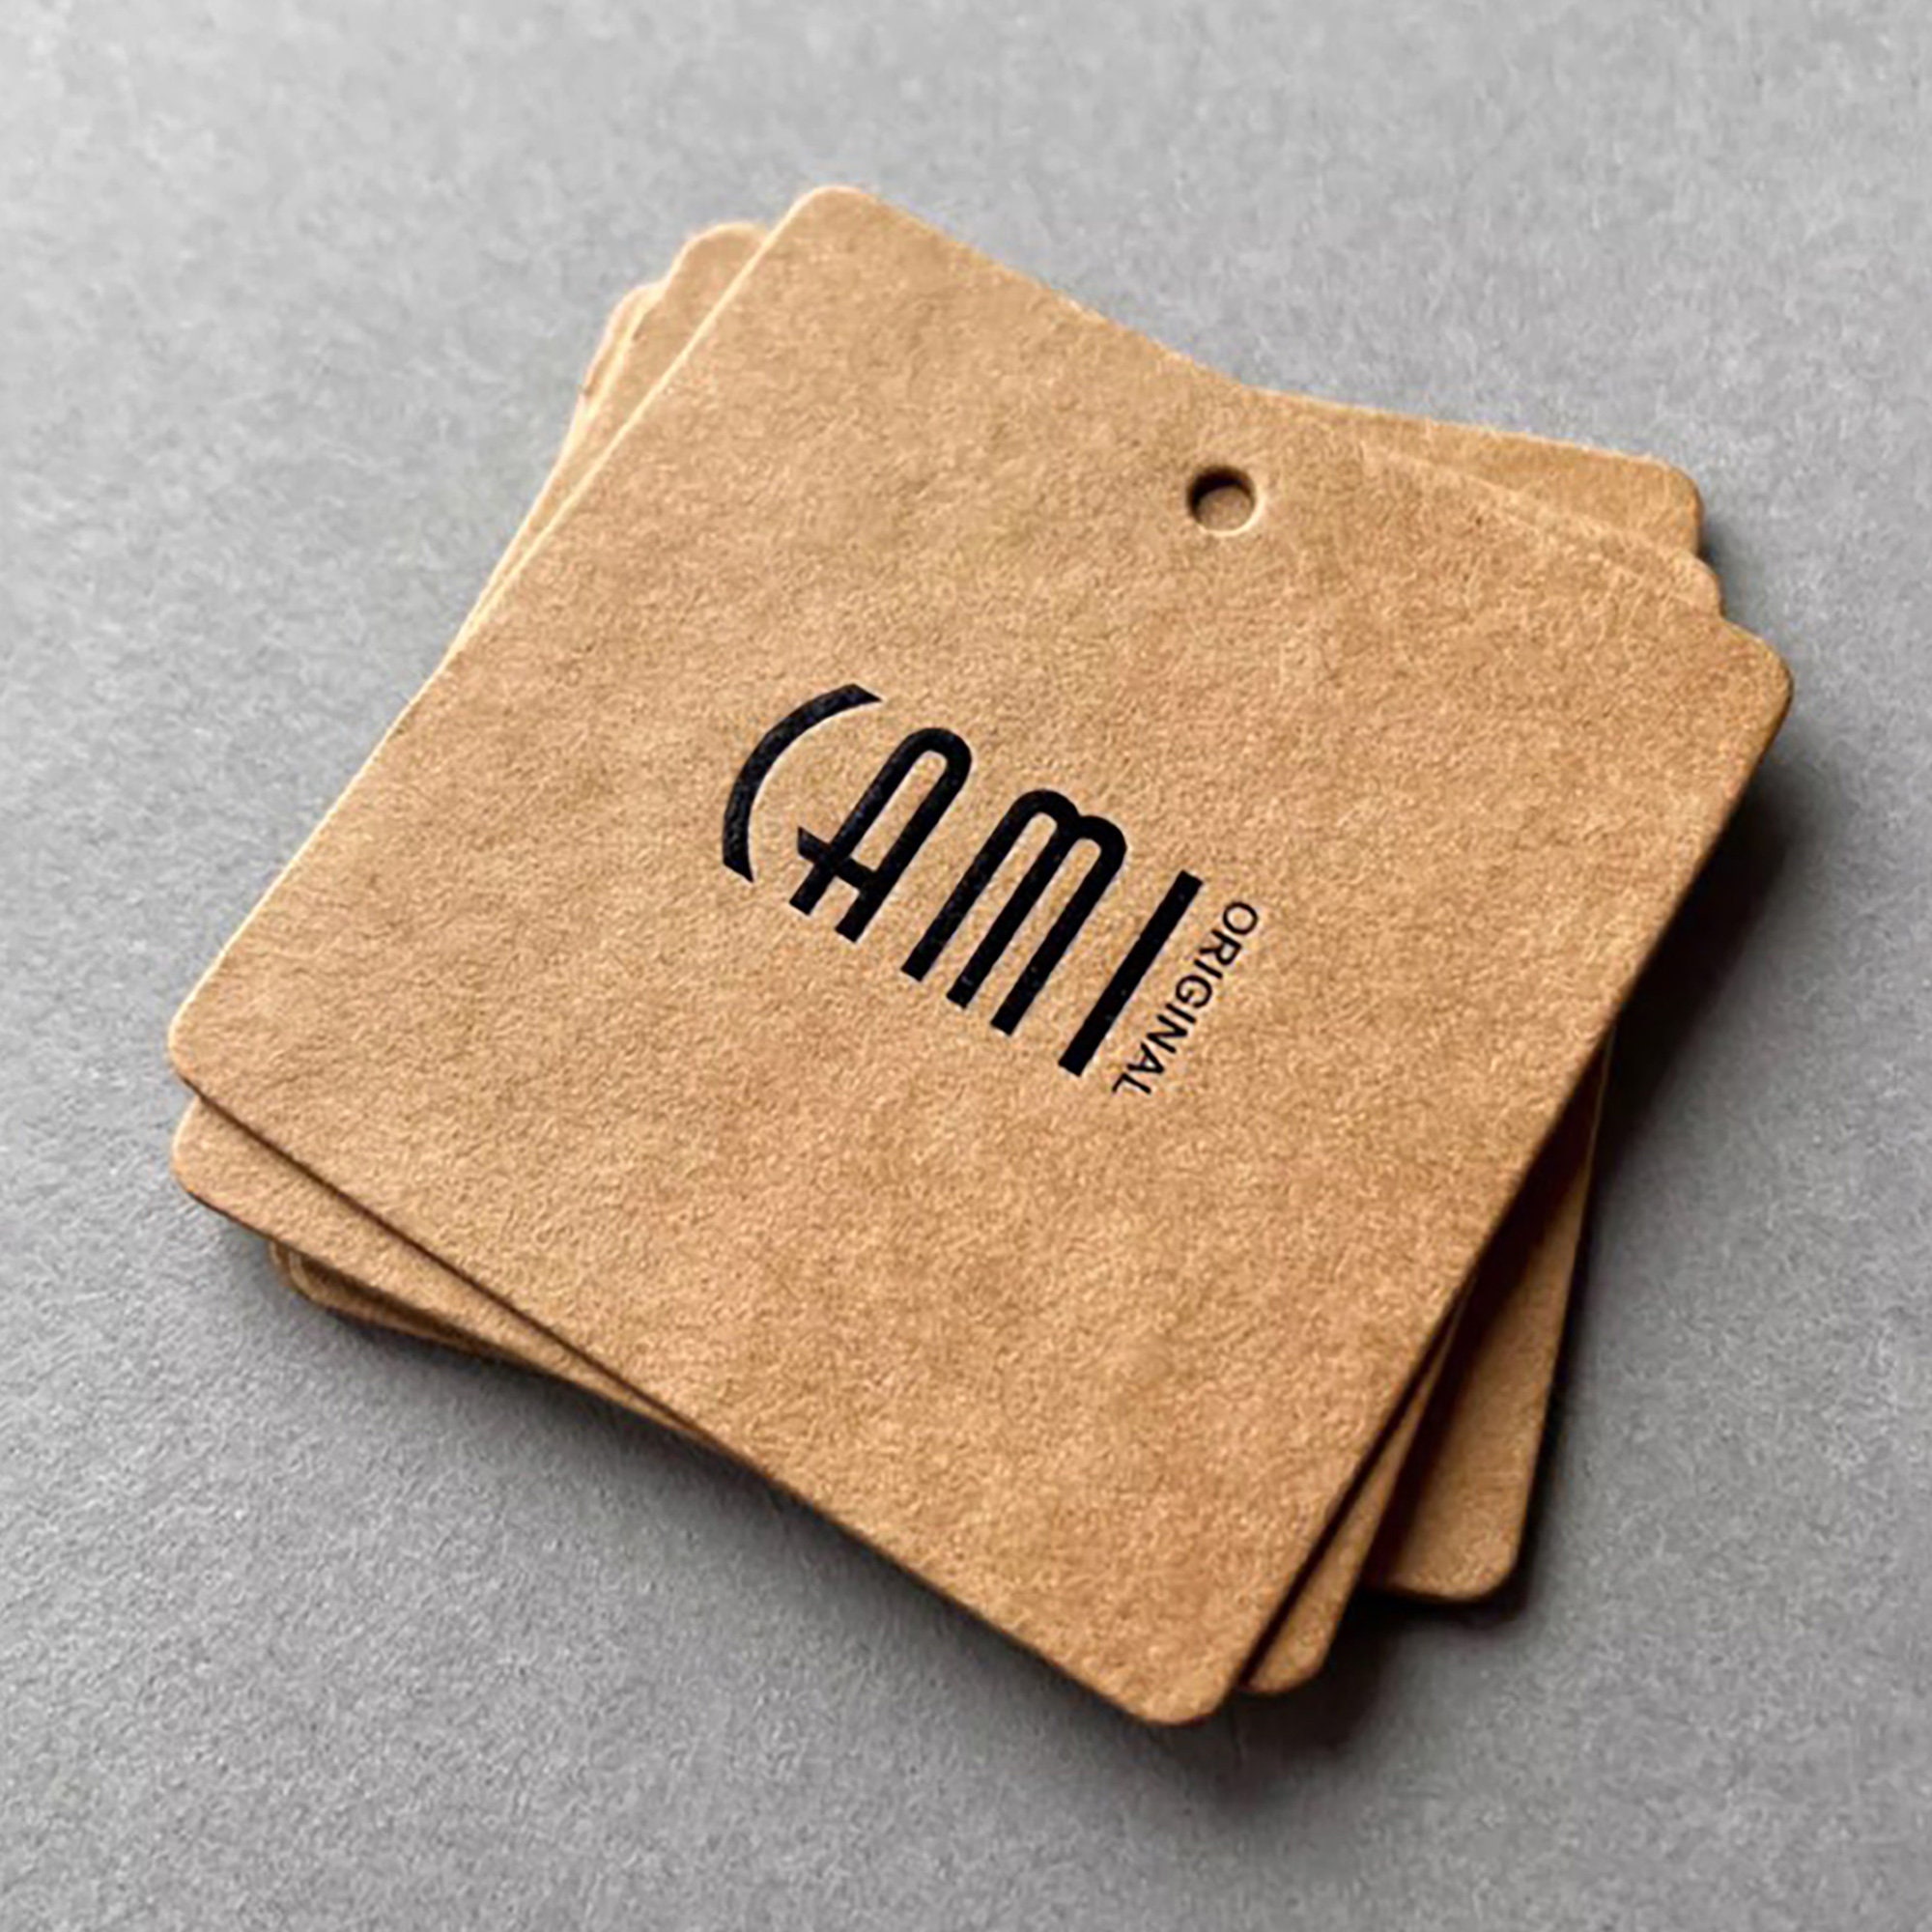 300pcs Custom White Hang Tag,brand Label,iron on Letters for Clothing,  Printed With Your Details,custom Wholesale 